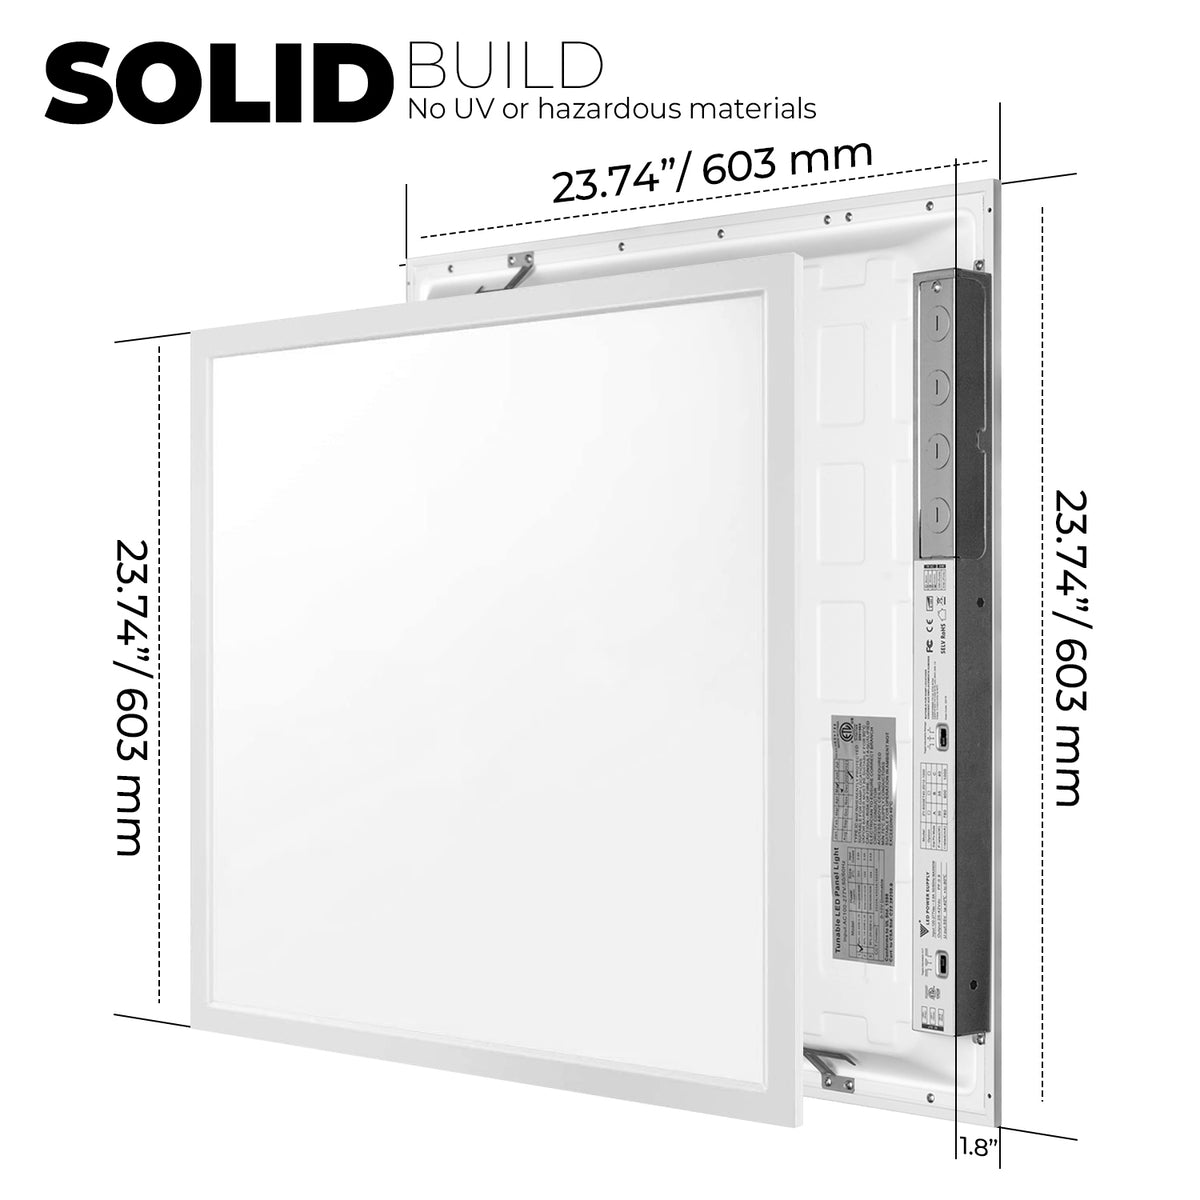 2x2 FT LED Panel Light, 30W/35W/40W, SELECTABLE WATTAGE &amp; CCT, 3CCT, ETL, FC, CE Certified